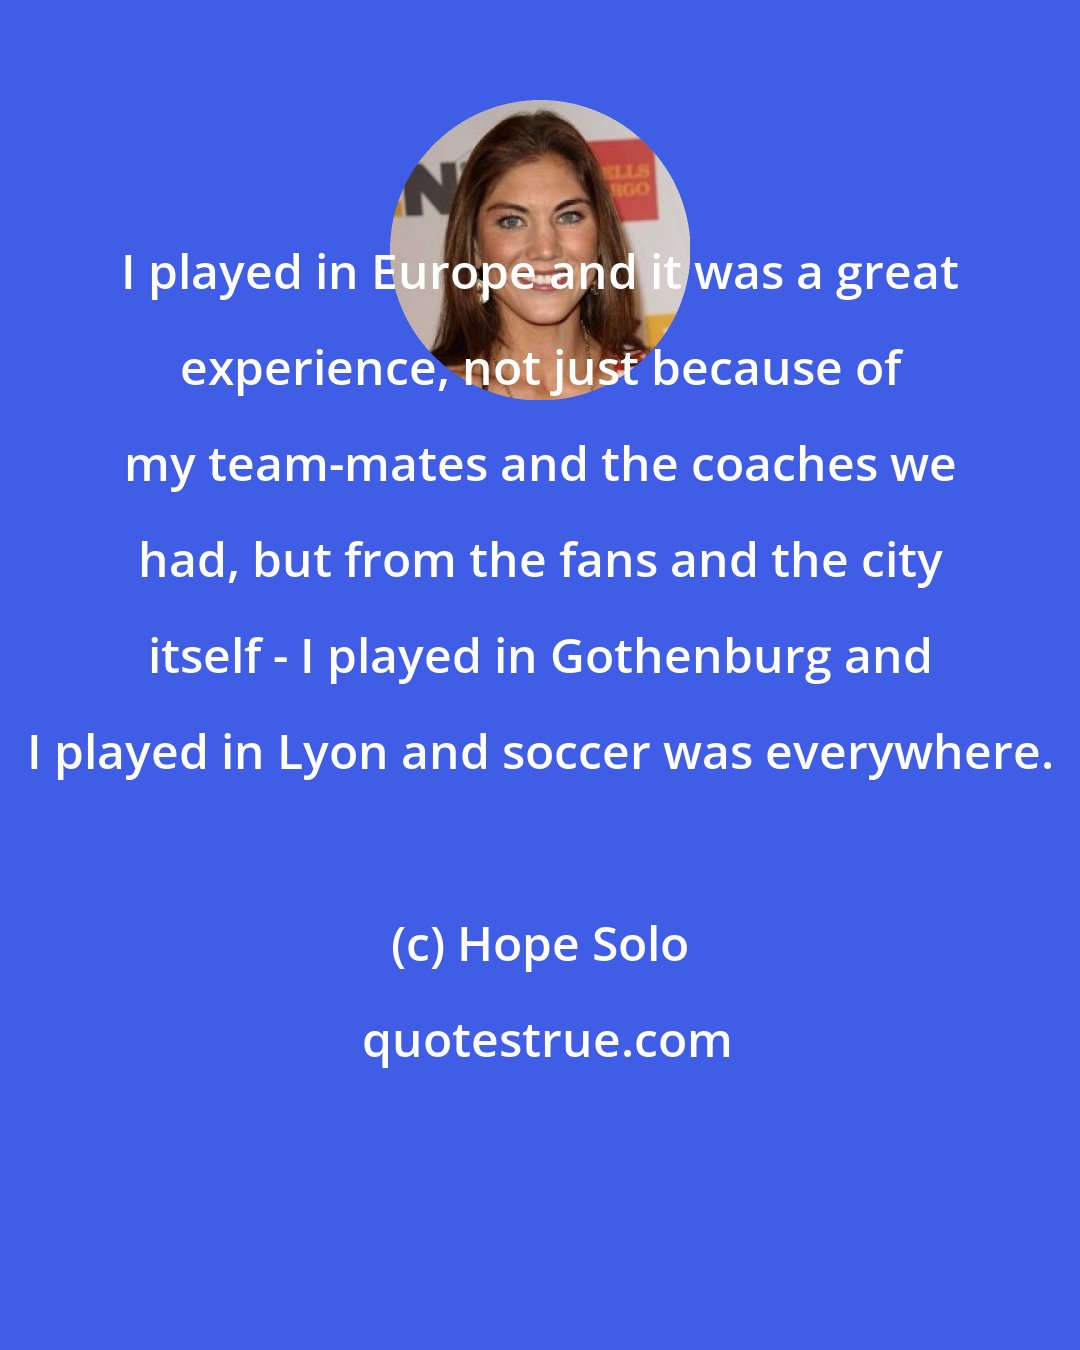 Hope Solo: I played in Europe and it was a great experience, not just because of my team-mates and the coaches we had, but from the fans and the city itself - I played in Gothenburg and I played in Lyon and soccer was everywhere.